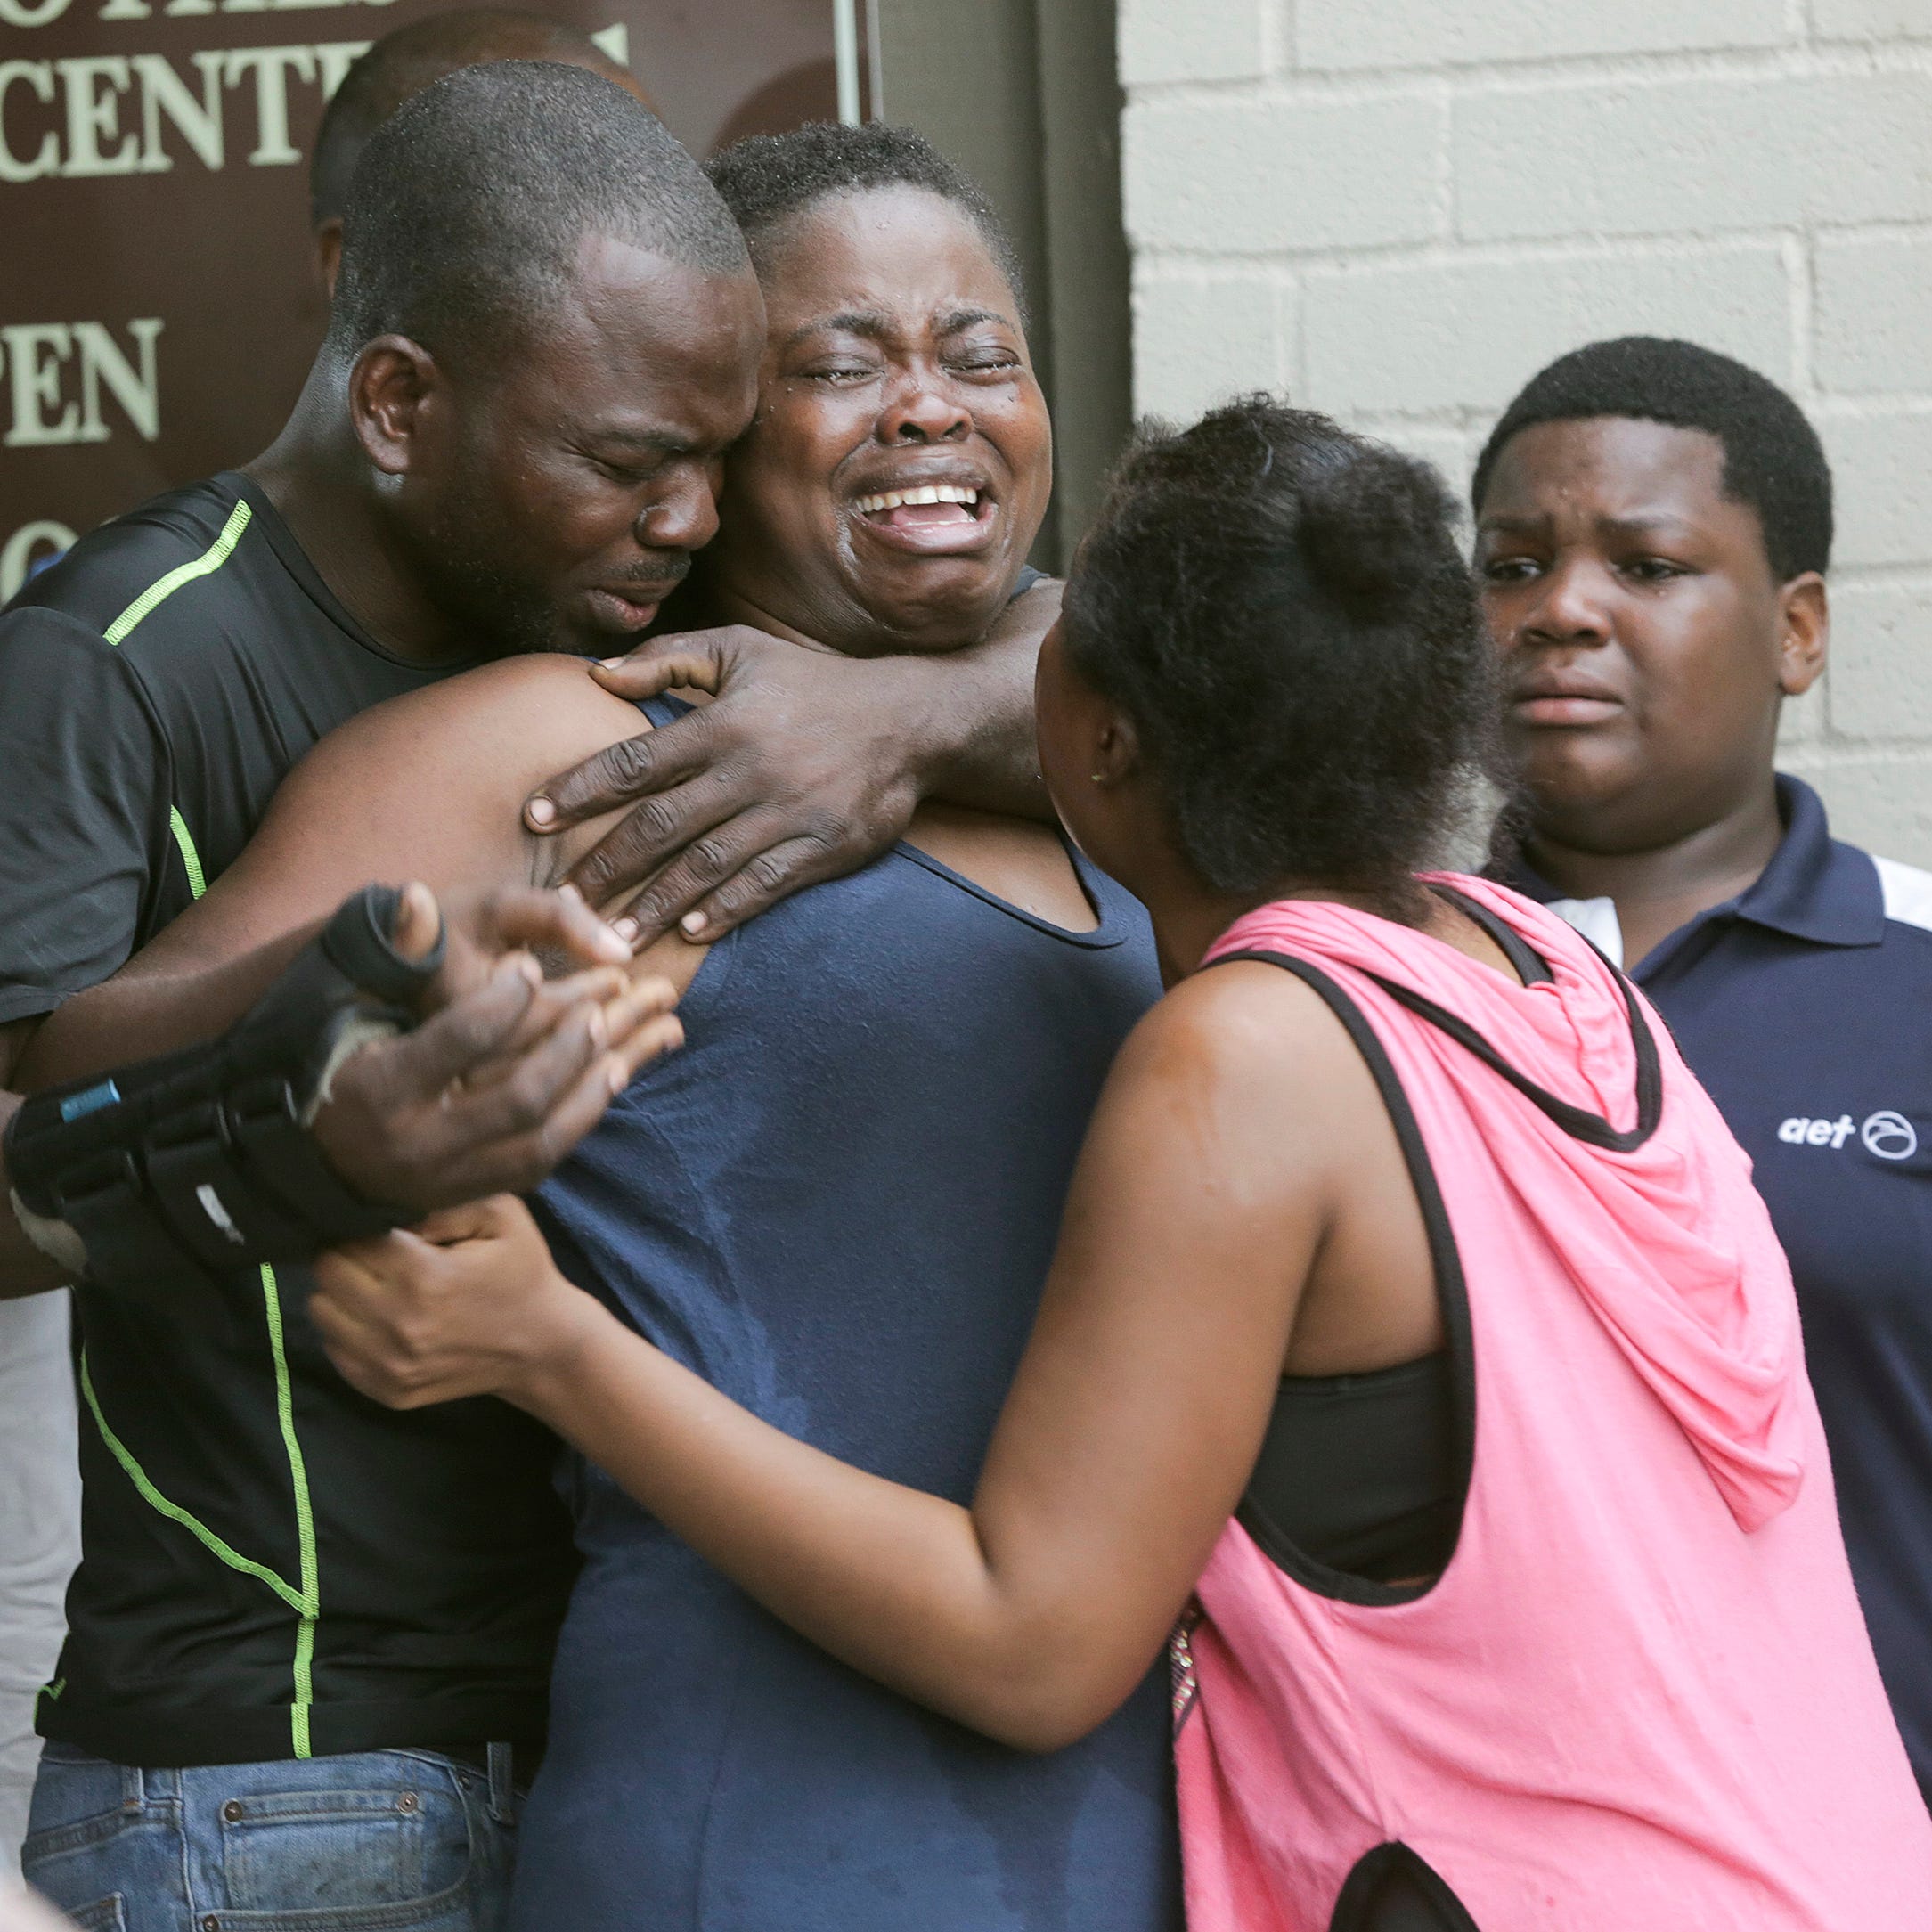 A woman is comforted after the bodies of two children were found stabbed to death in their father's apartment on Saturday, Aug. 4, 2018 in Houston. Authorities say a man suspected of fatally stabbing his two children in Houston has been hospitalized 